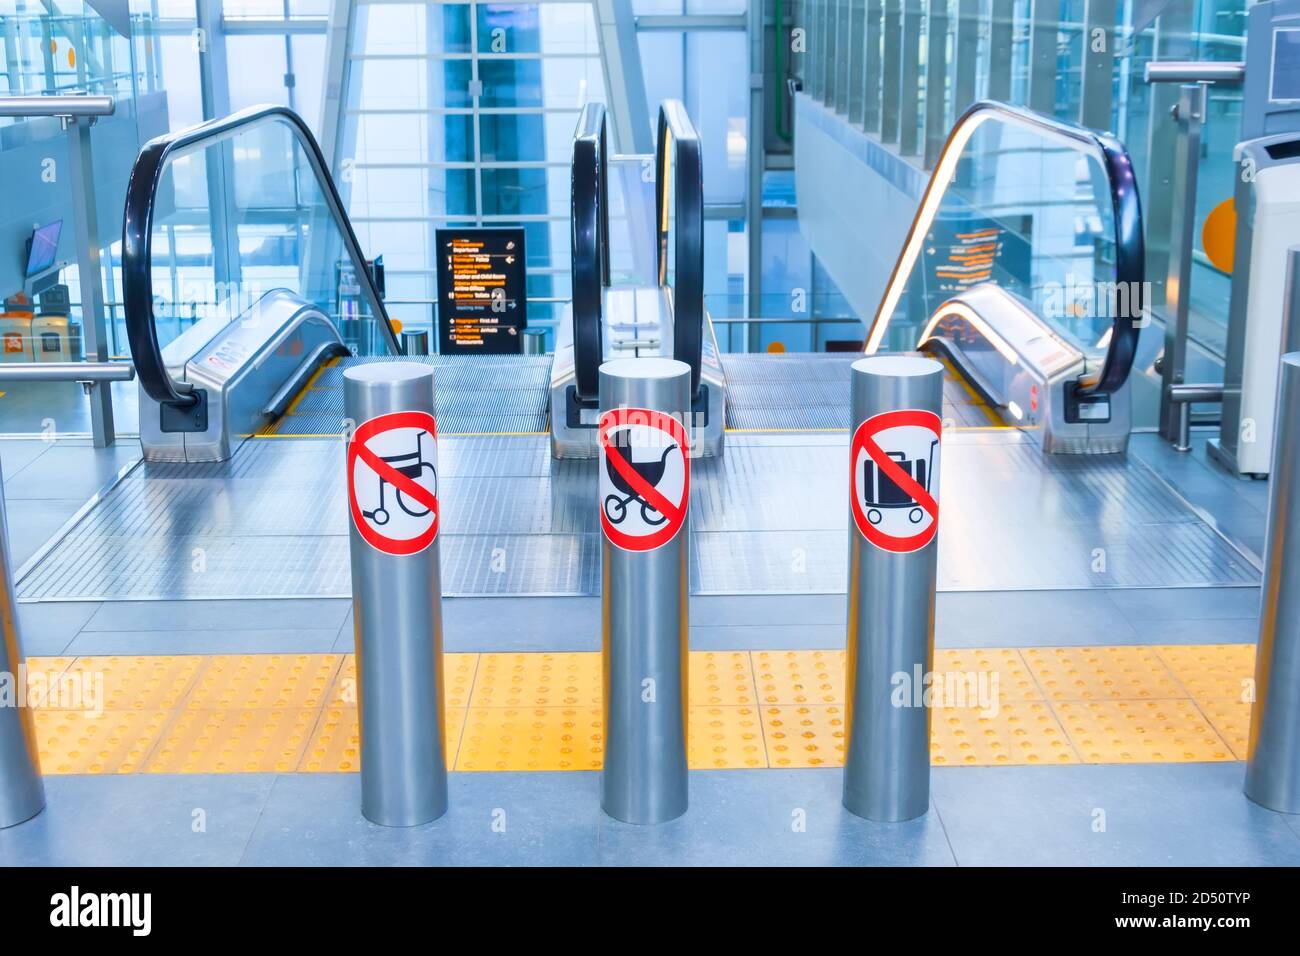 Prohibition signs for luggage, suitcases, carts and baby carriages on an escalator in a public building Stock Photo